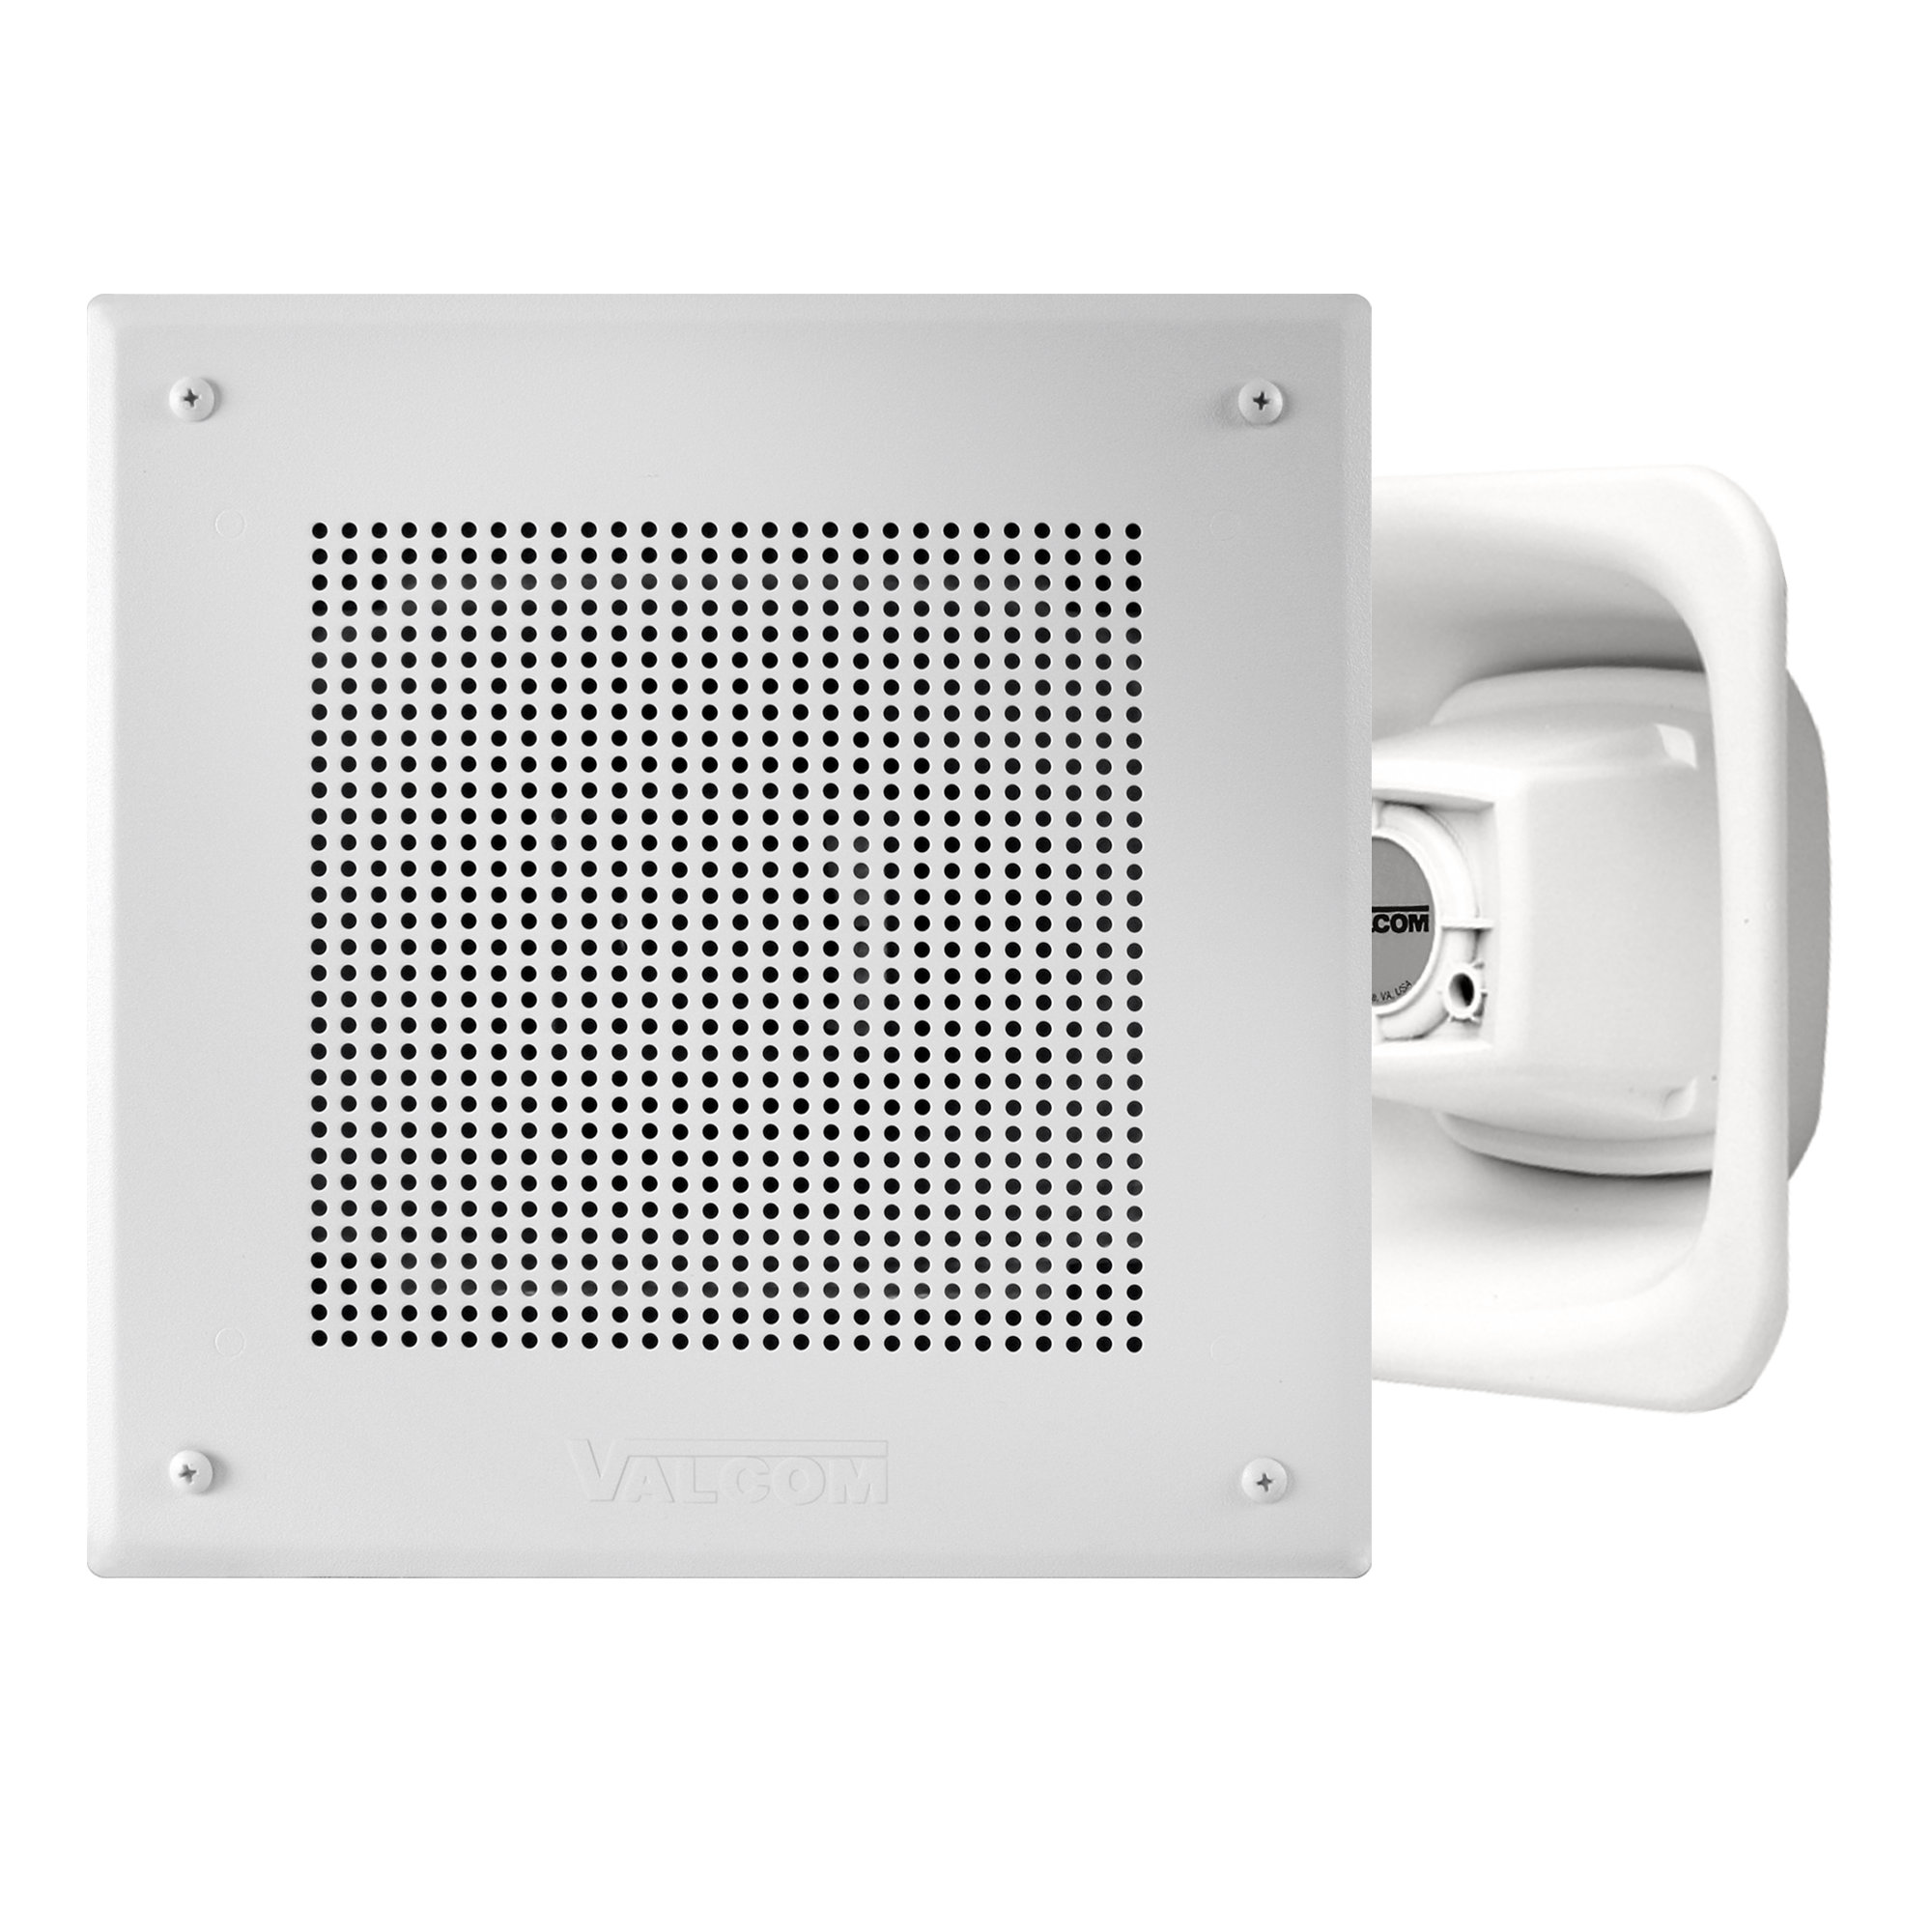 VIP-9880IP Square FlexHorn™, Square Hole Pattern, One-Way/Talkback Programmable, White